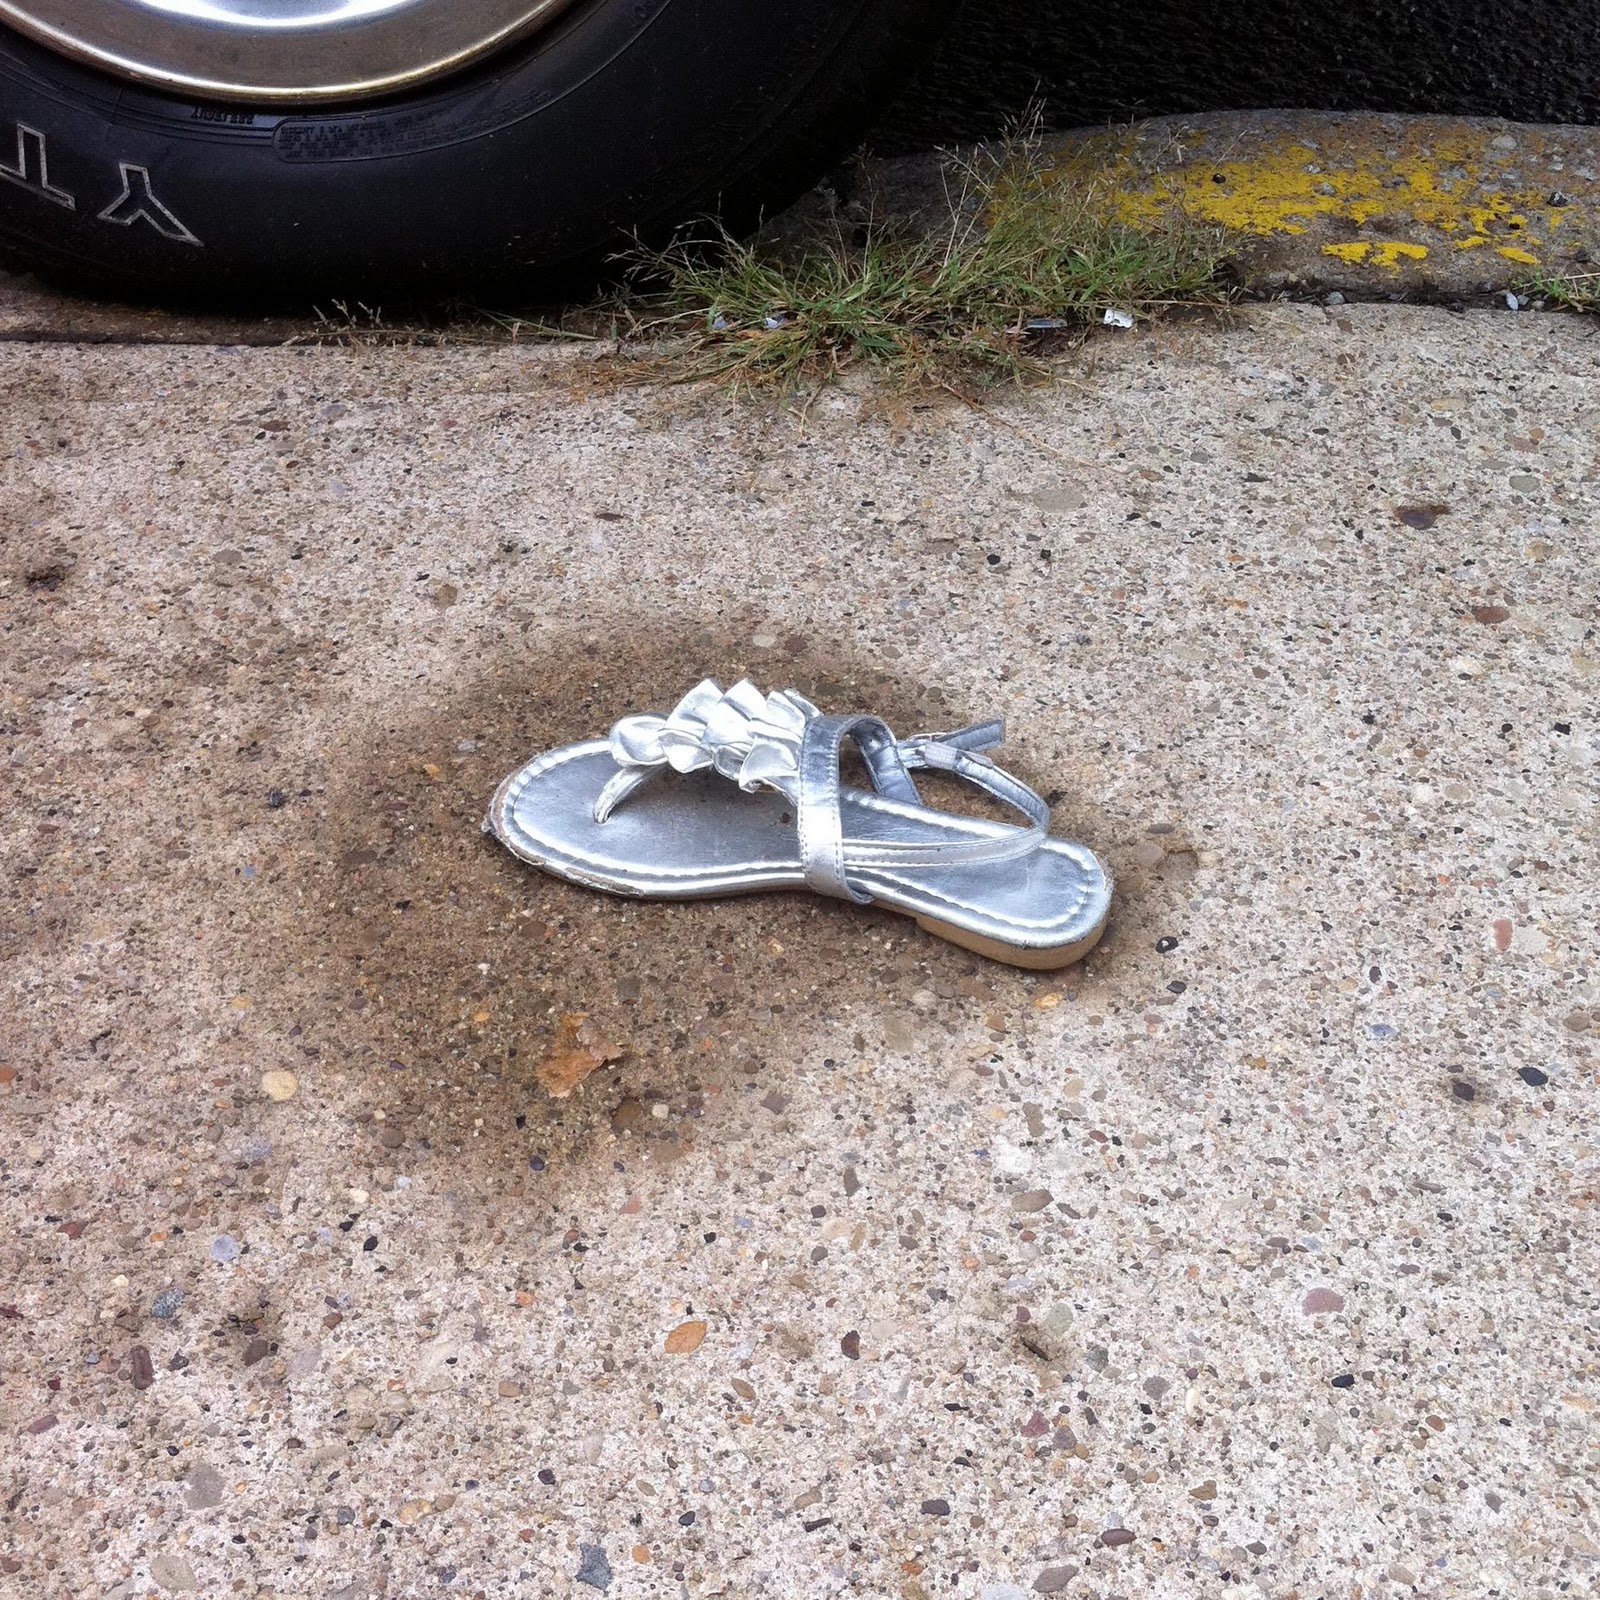 I found this silver sandal in Garfield on August 19.